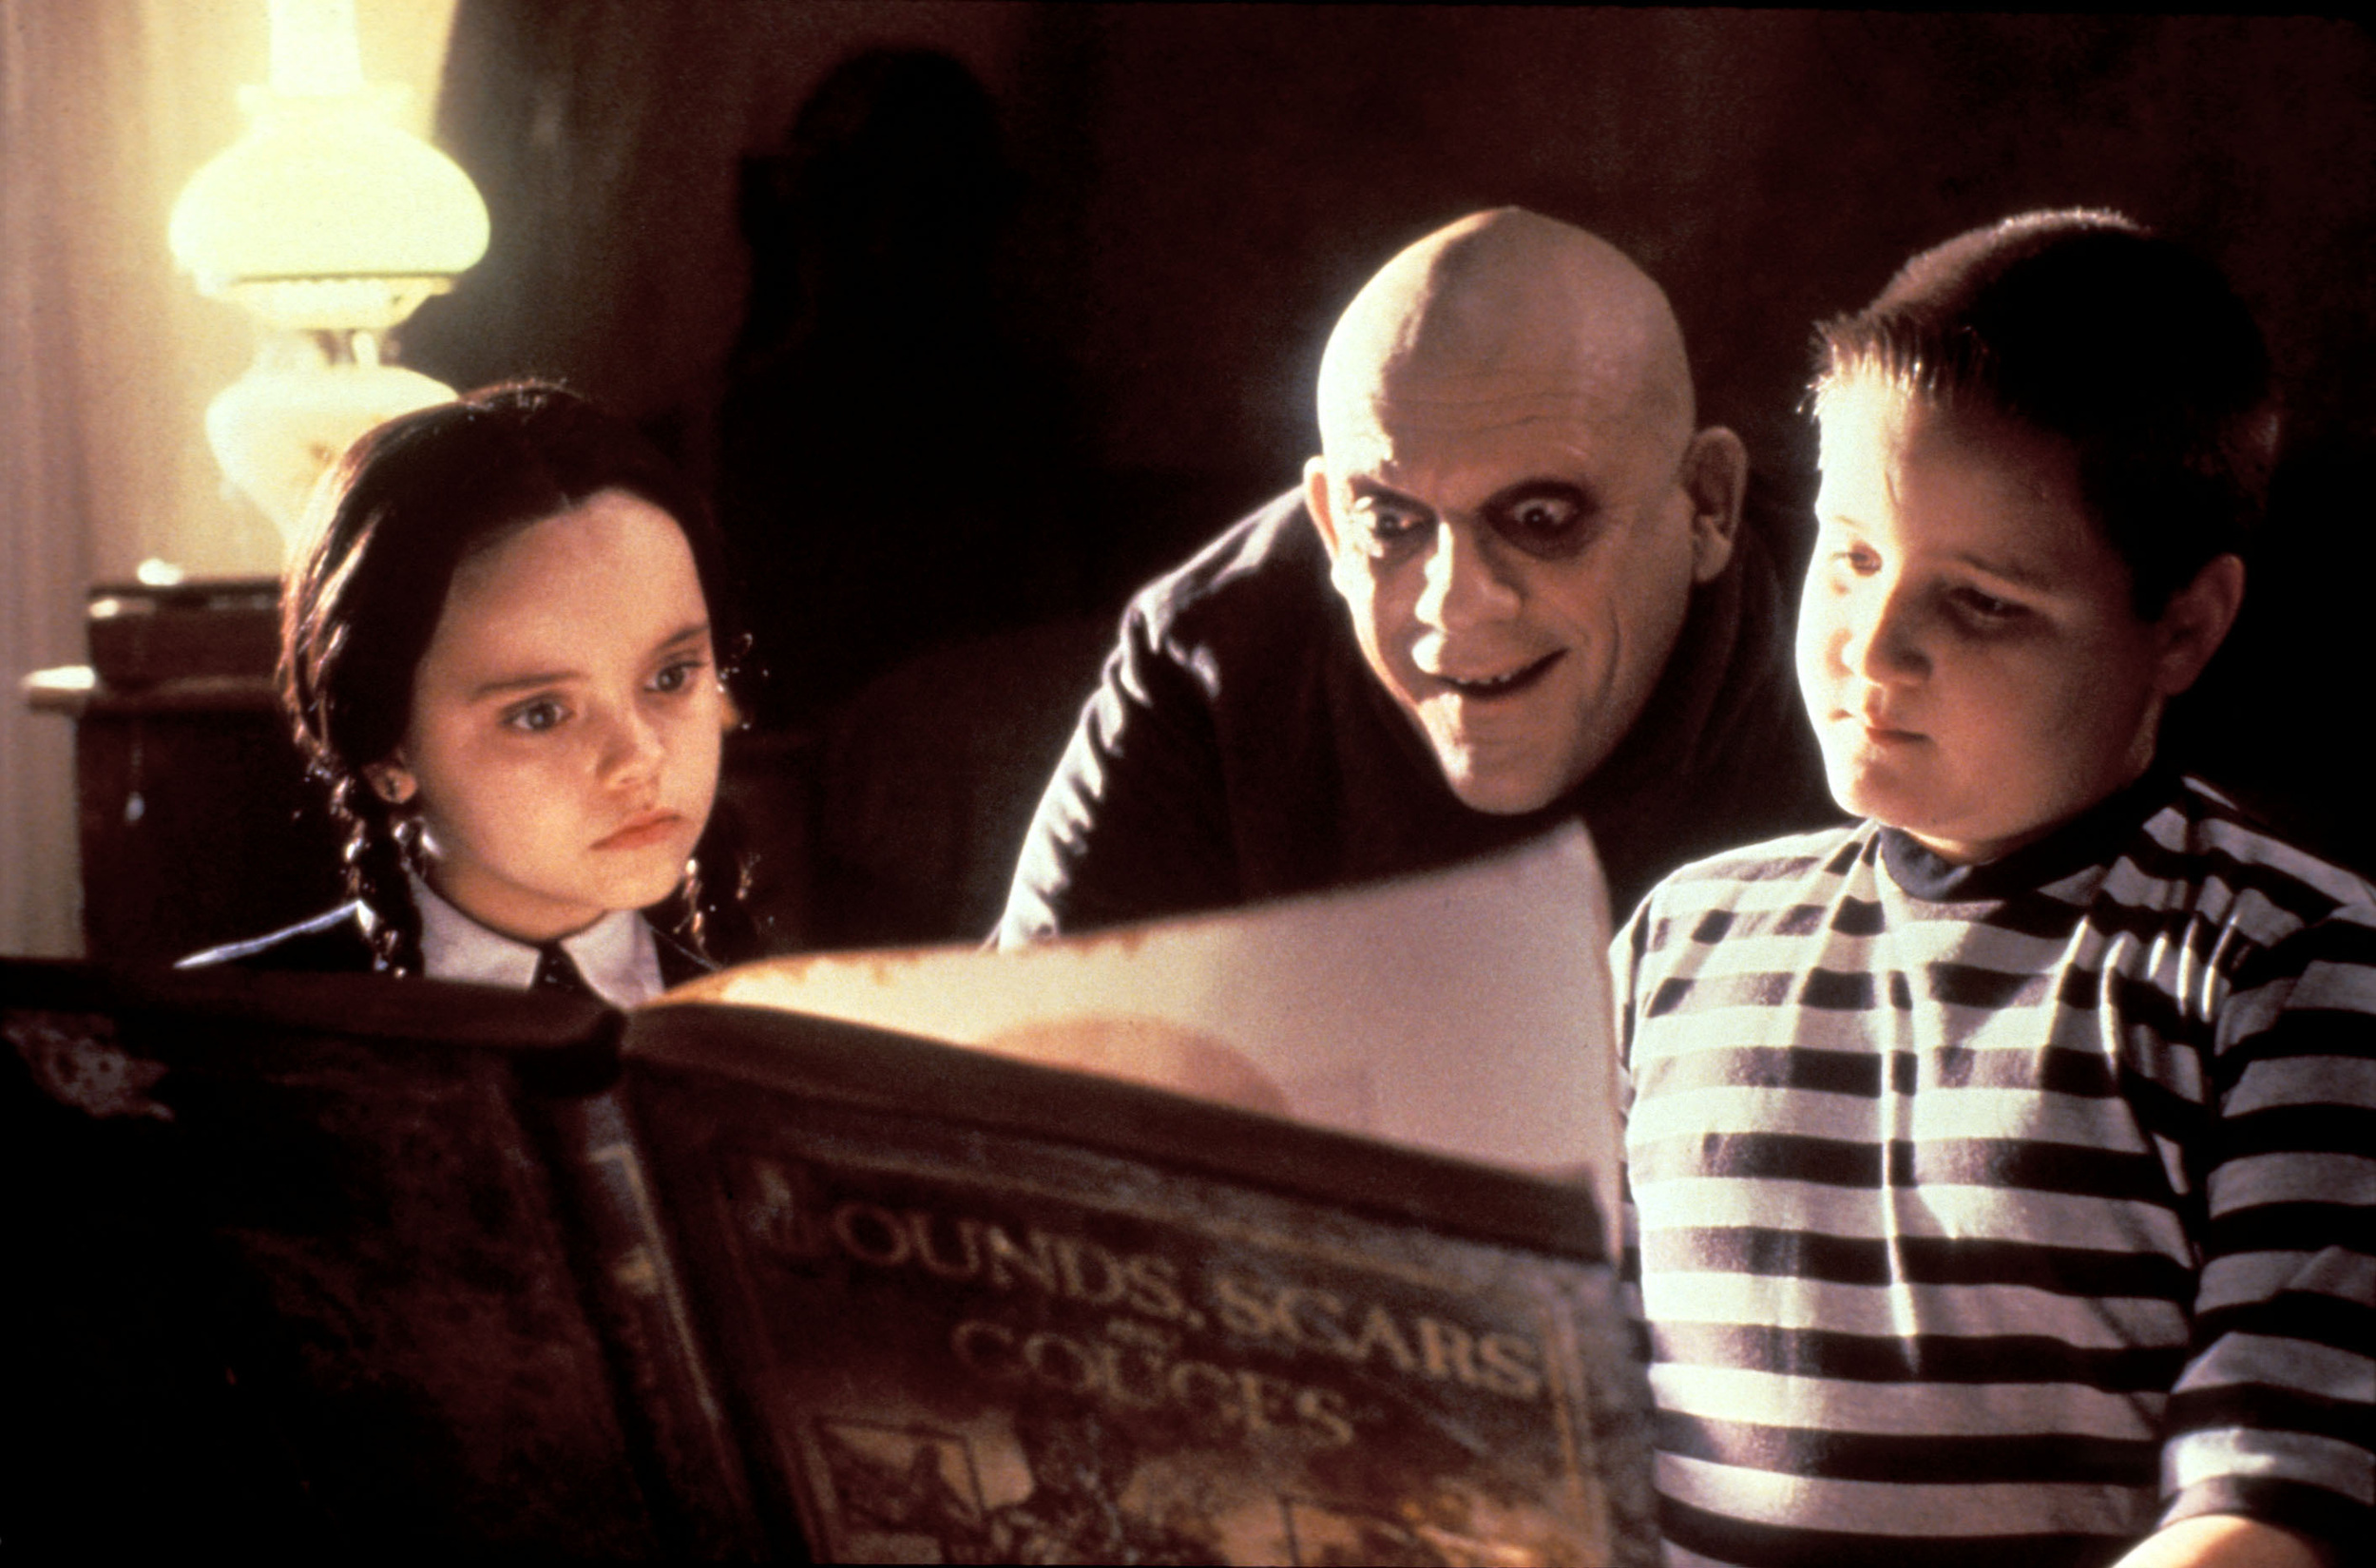 <p>Tim Burton may not have directed, but a project like <em>The Addams Family</em> certainly attracted a type. Caroline Thompson was one of the two credited writers. Her debut screenplay was <em>Edward Scissorhands</em>, and she also wrote on <em>The Nightmare Before Christmas</em> later. The other screenwriter was Larry Wilson, who wrote <a href="https://www.yardbarker.com/entertainment/articles/20_facts_you_might_not_know_about_beetlejuice/s1__37660945#slide_1" rel="noopener noreferrer"><em>Beetlejuice</em></a>.</p><p>You may also like: <a href='https://www.yardbarker.com/entertainment/articles/actors_who_became_unrecognizable_in_roles_040424/s1__39115025'>Actors who became unrecognizable in roles</a></p>